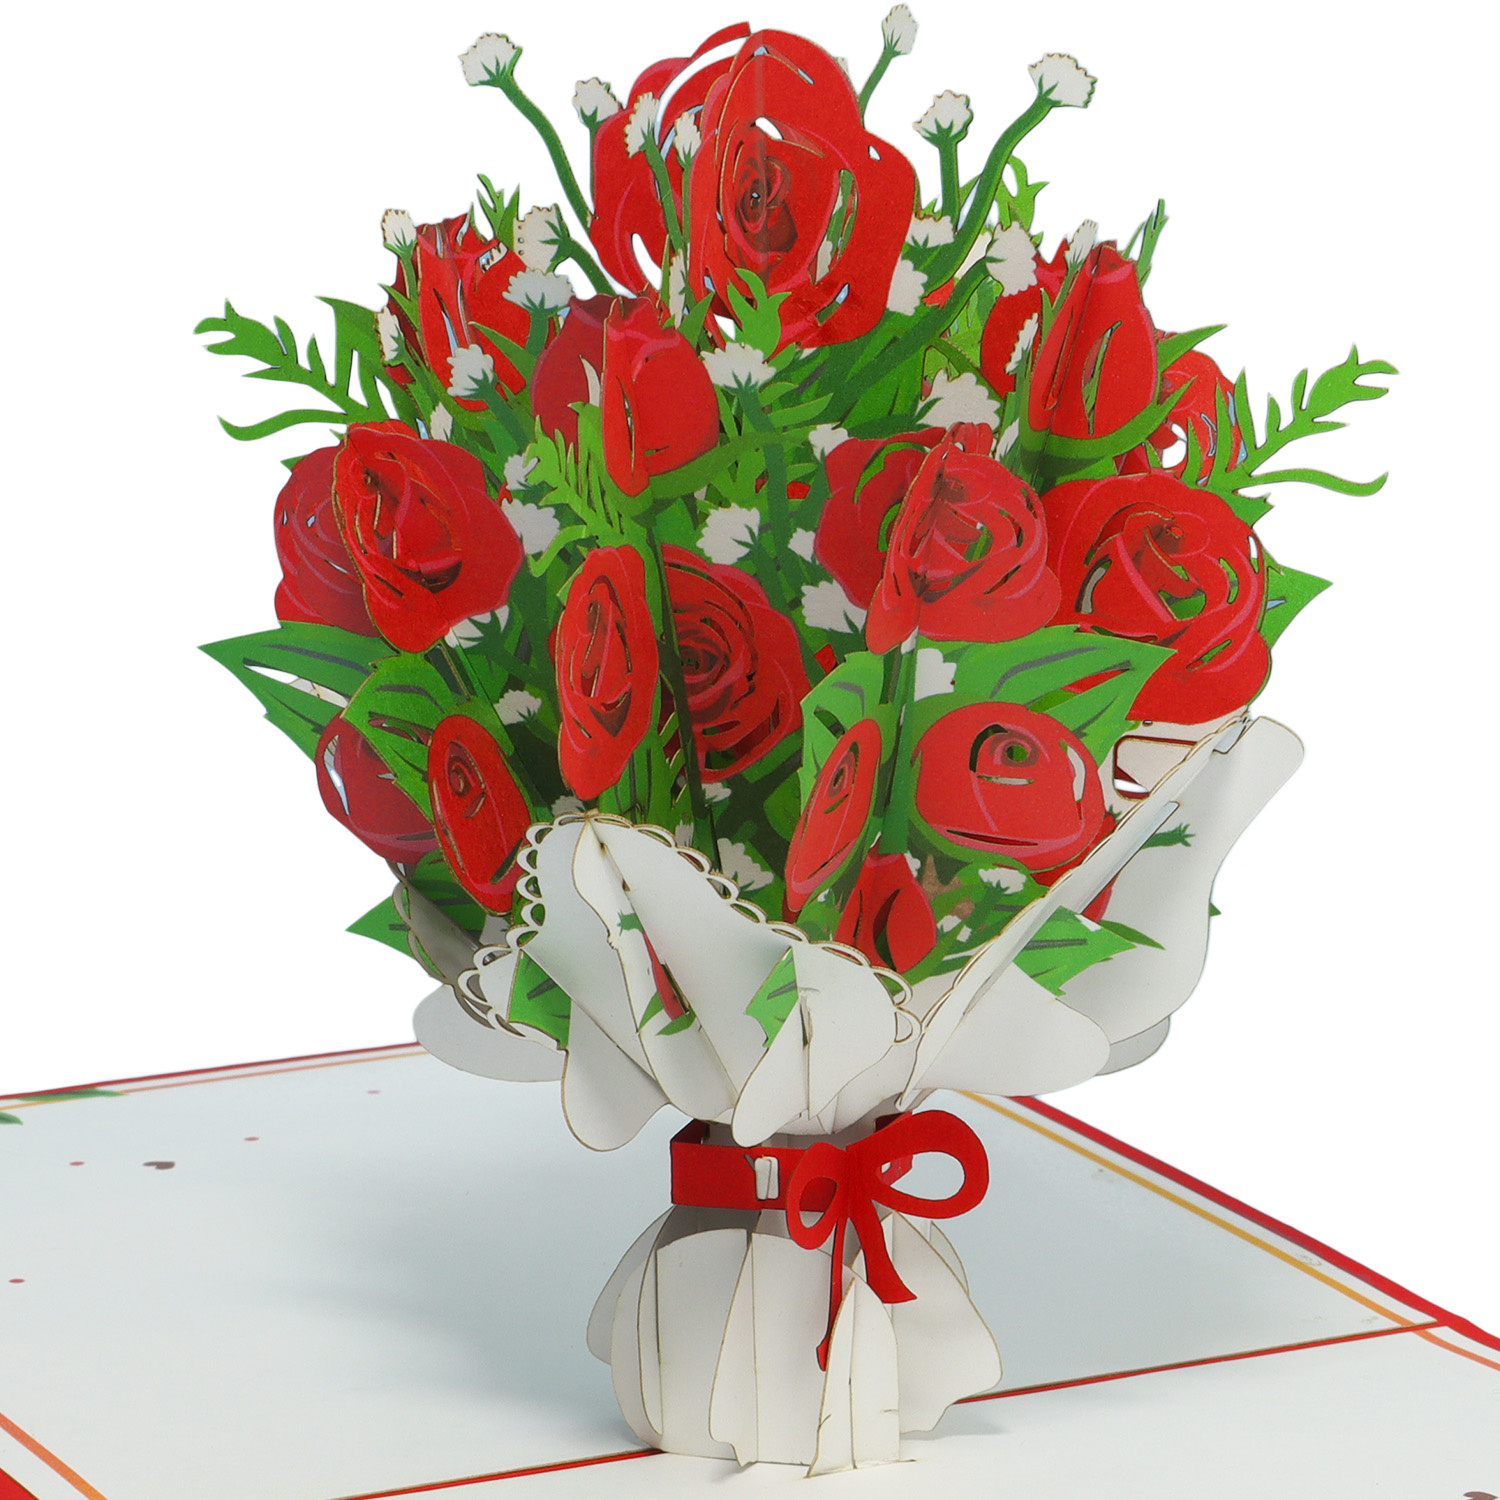 LINPOPUP pop up card flowers, flower cards,bouquet pop up, greeting cards flowers, 3d folding card, mother's day card, farewell, birthday card, get well card, roses, LIN17765, LINPopUp®, N506